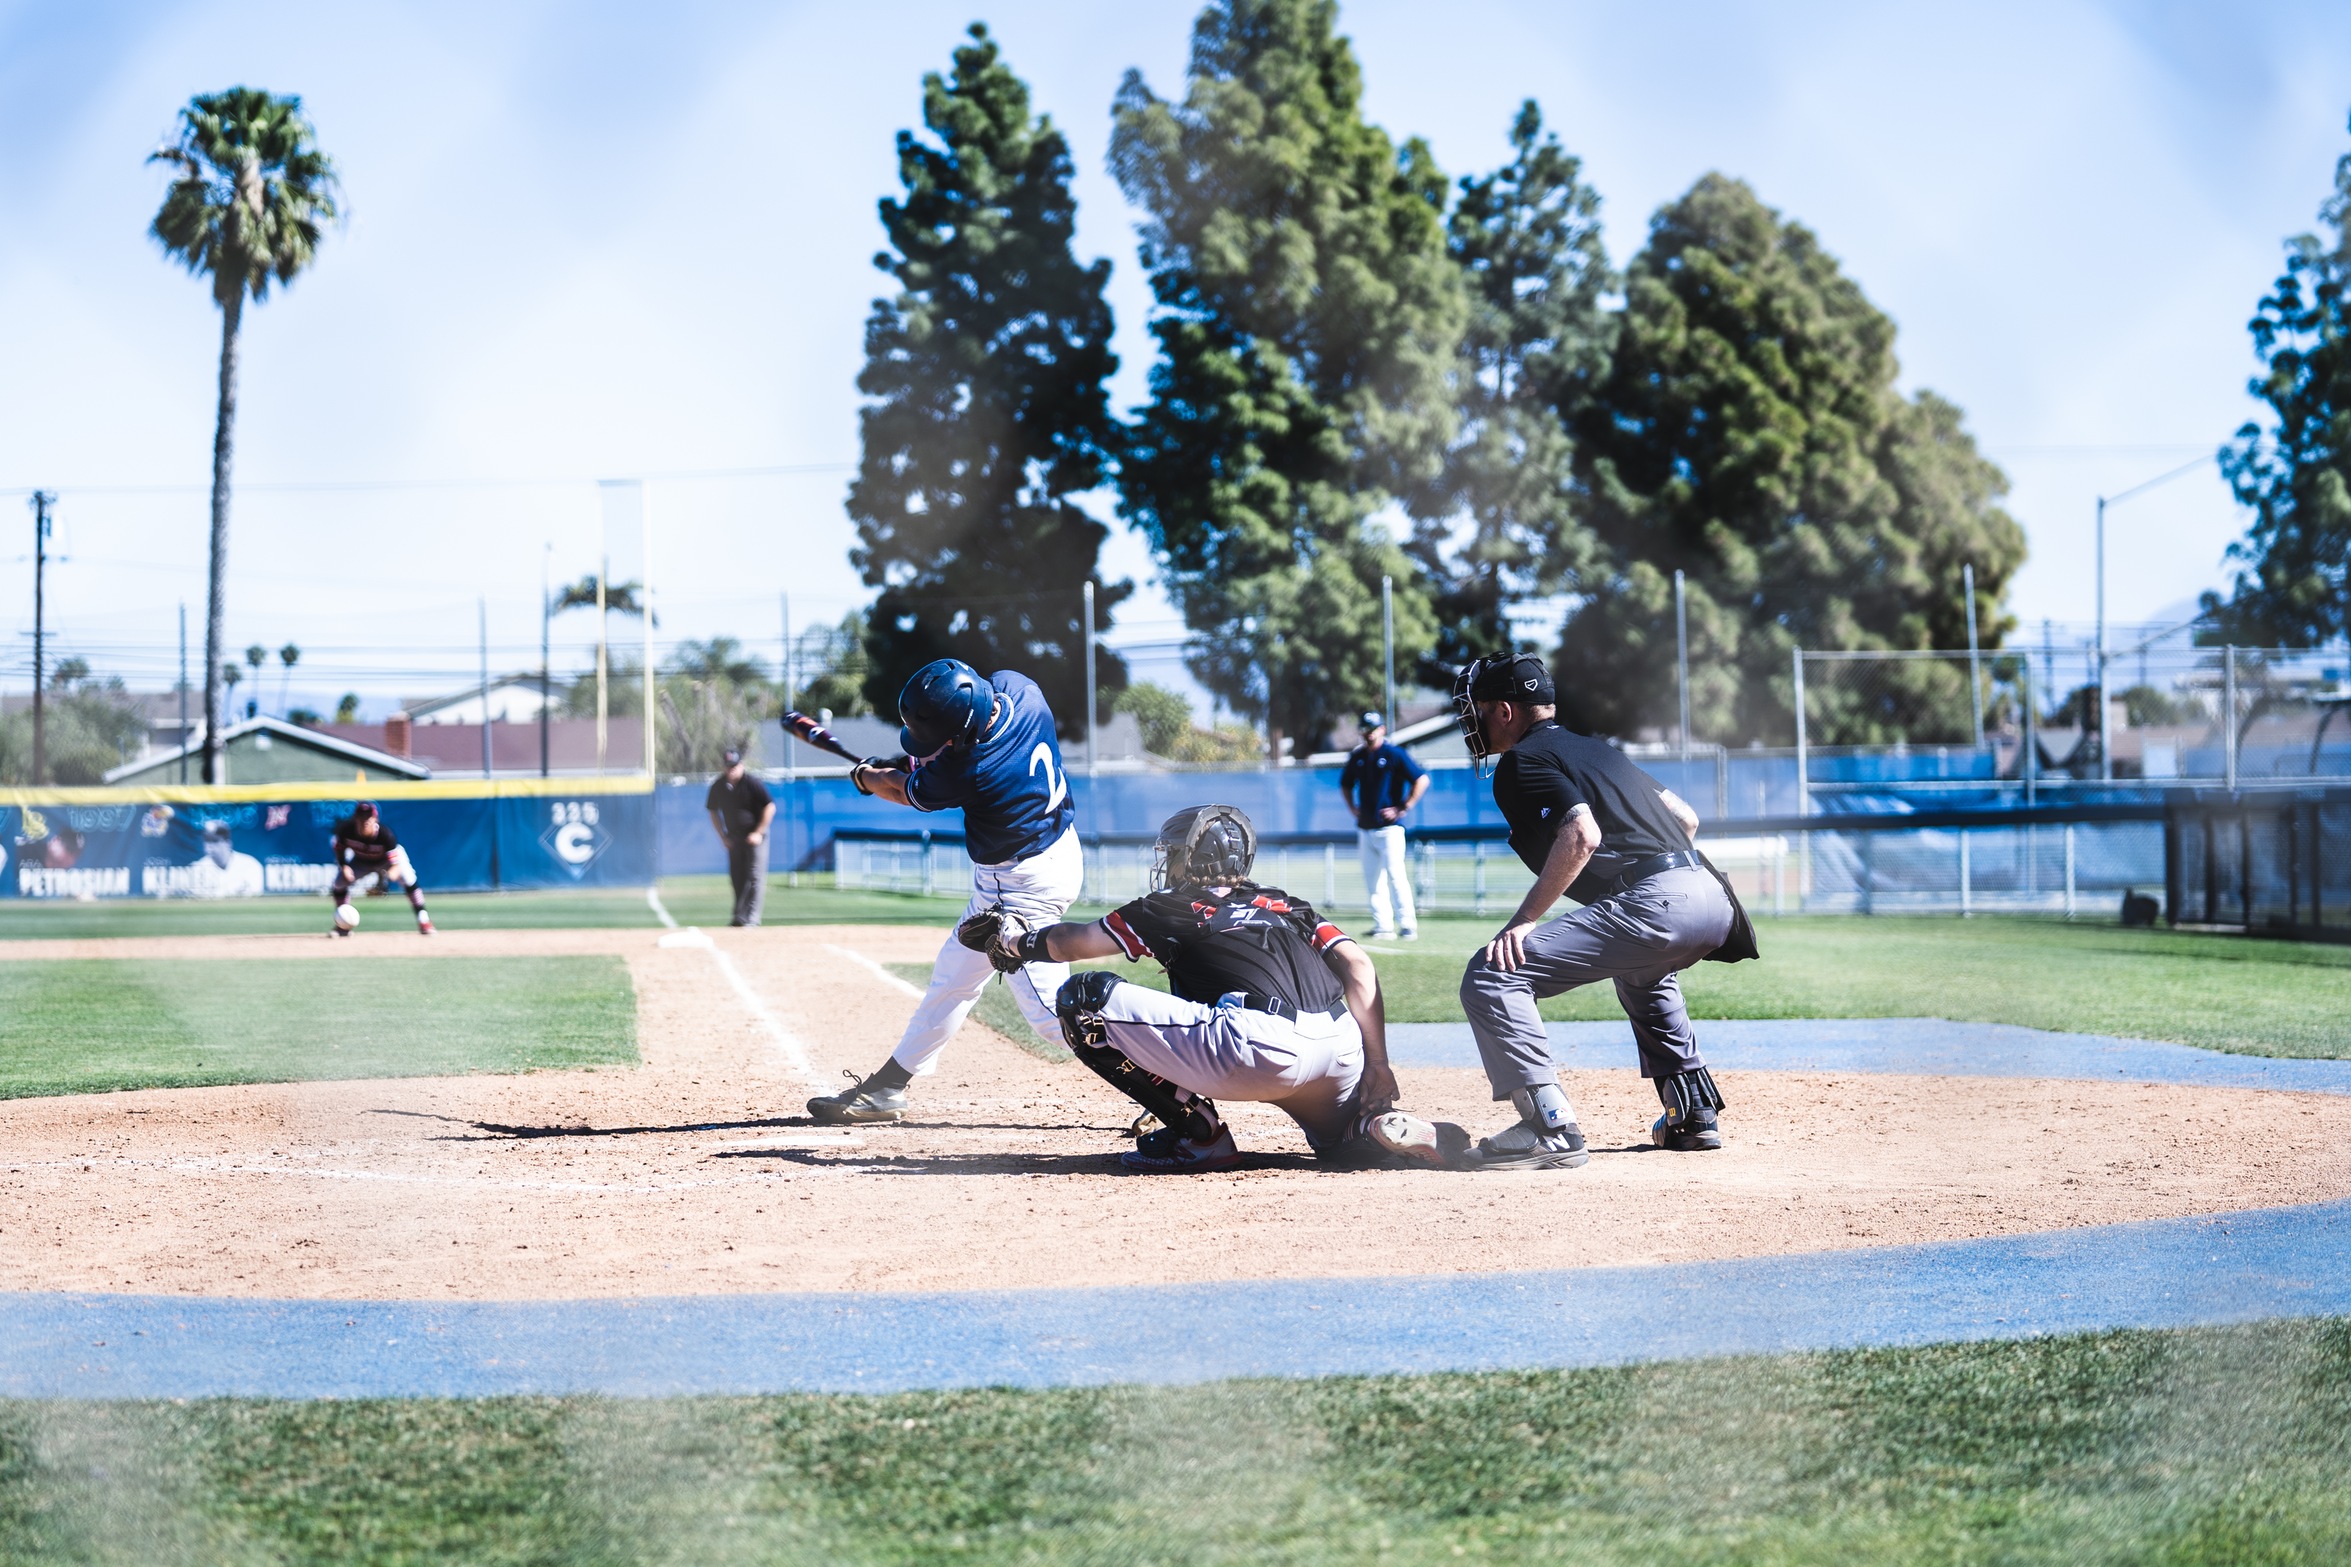 Chargers Offense Explodes with Five Home Runs in Win Over Merced